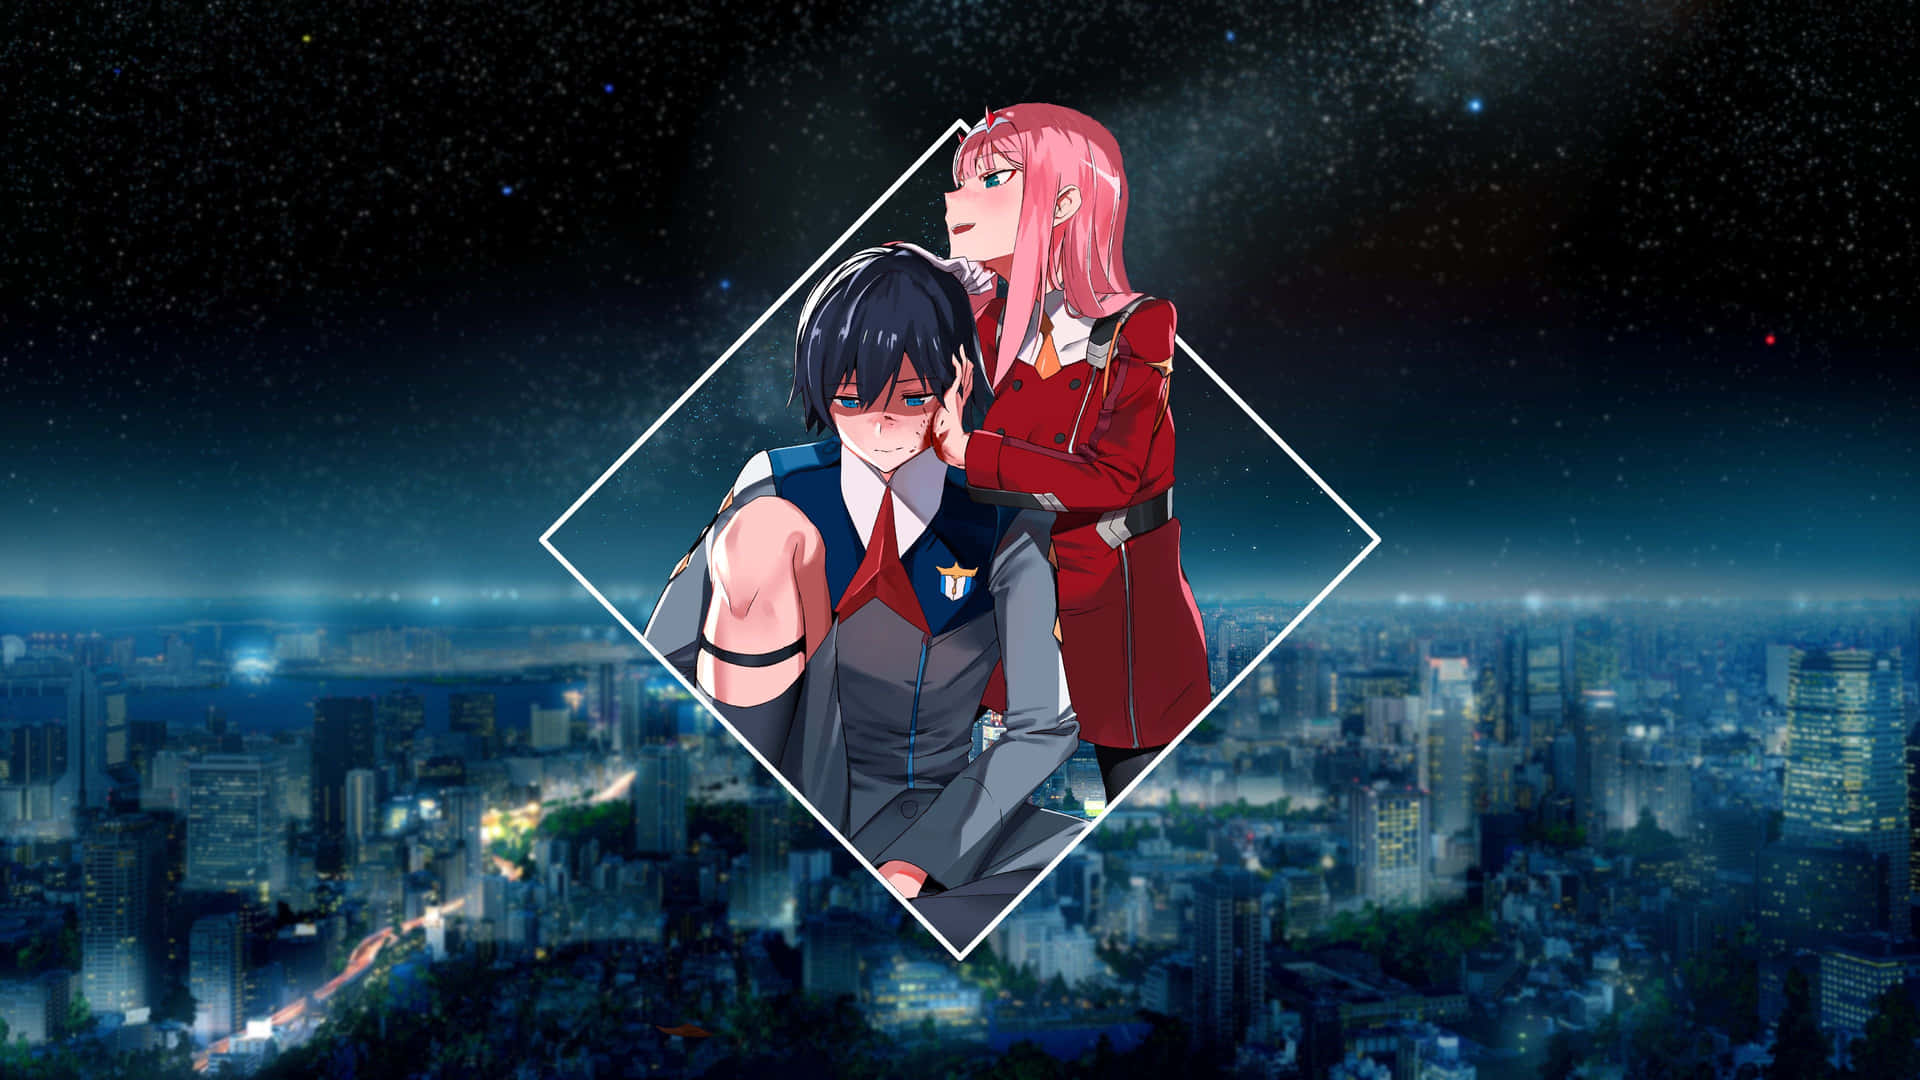 Iconic anime couple in Darling in the Franxx